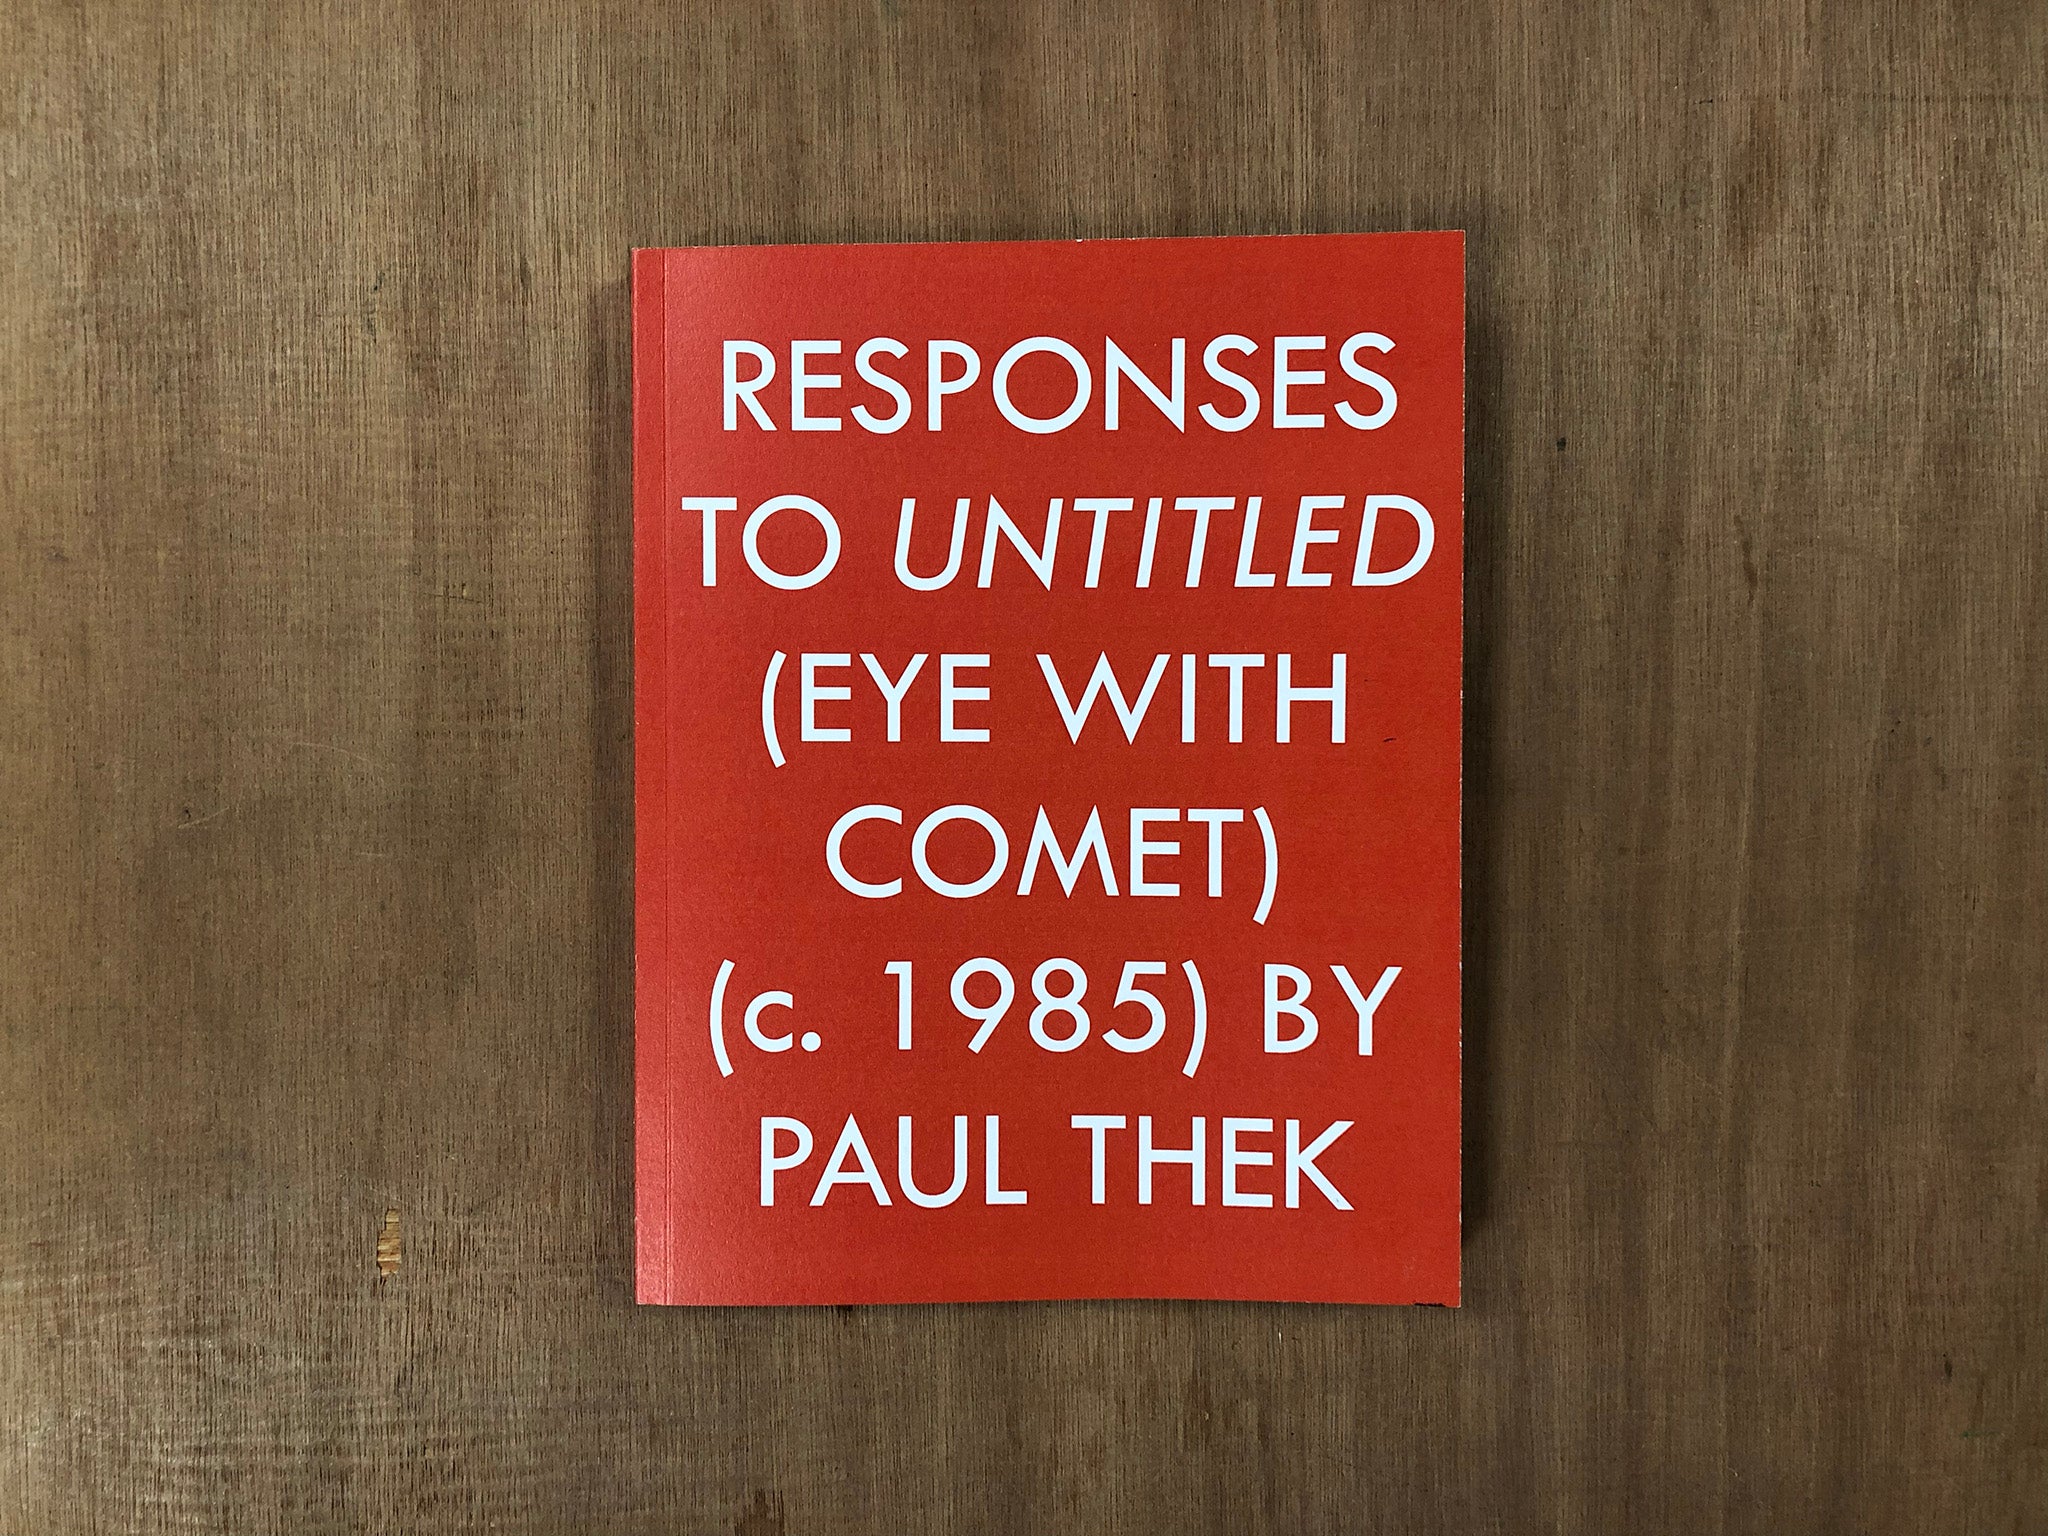 RESPONSES TO UNTITLED (EYE WITH COMET) (C. 1985) BY PAUL THEK by Various Artists